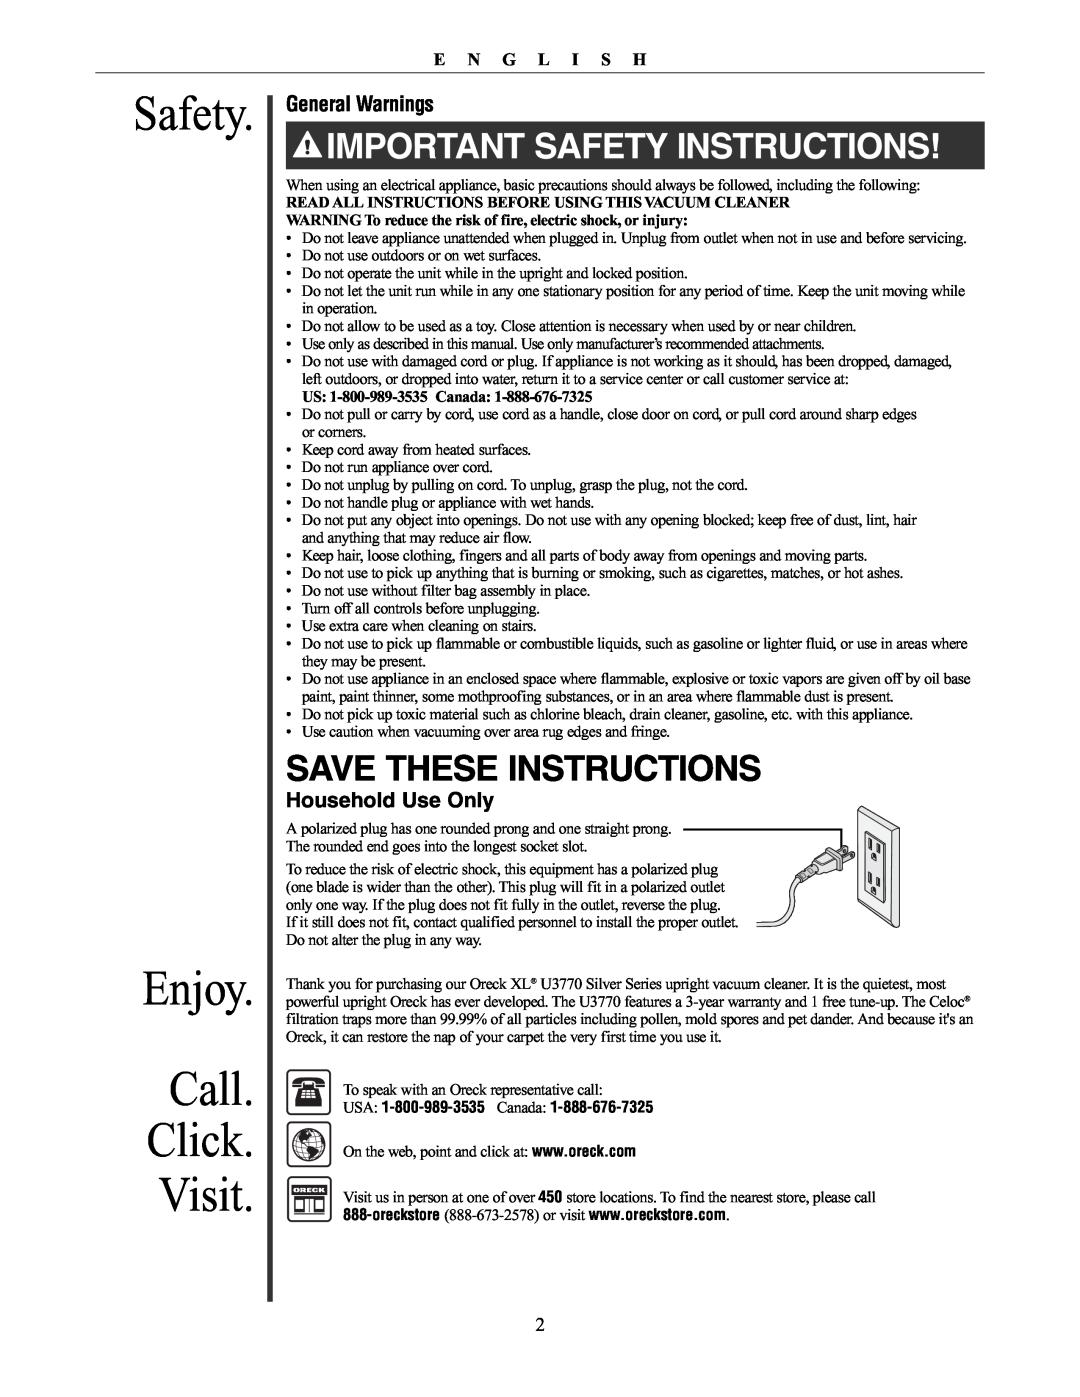 Oreck 76011-01REVC manual Safety Enjoy Call Click Visit, Save These Instructions, General Warnings, Household Use Only 